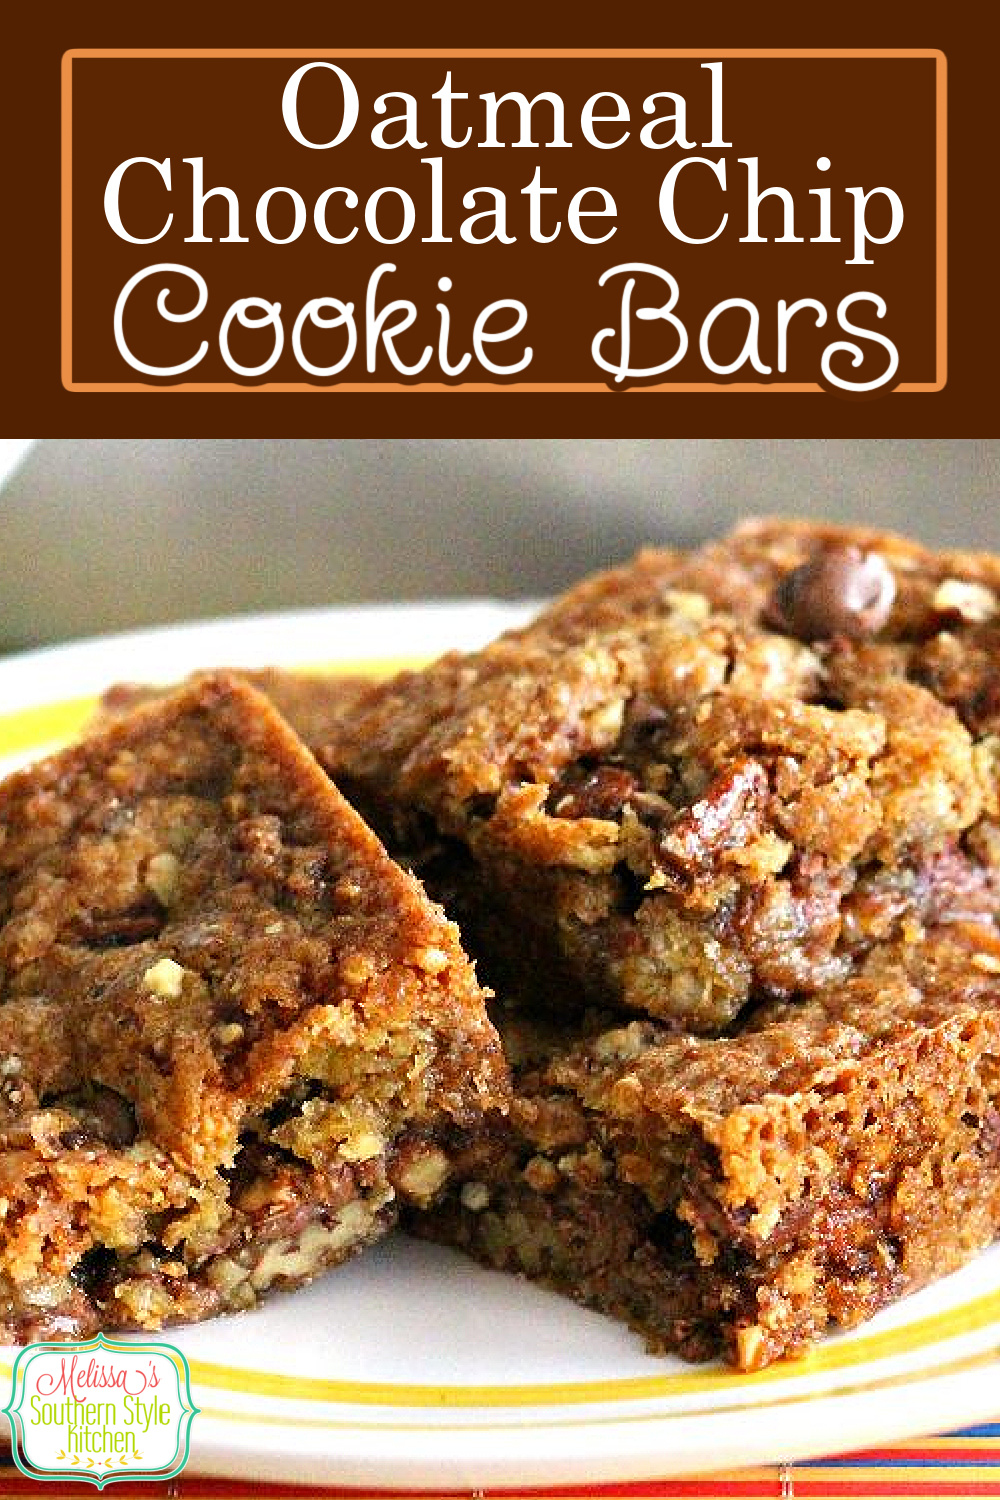 Treat the family to these gooey Oatmeal Chocolate Chip-Pecan Cookie Bars for dessert. #chocolatechipcookiebars #oatmealcookies #cookiebars #desserts #dessertfoodrecipes #southernrecipes #southernfood #melissassouthernstylekitchen via @melissasssk